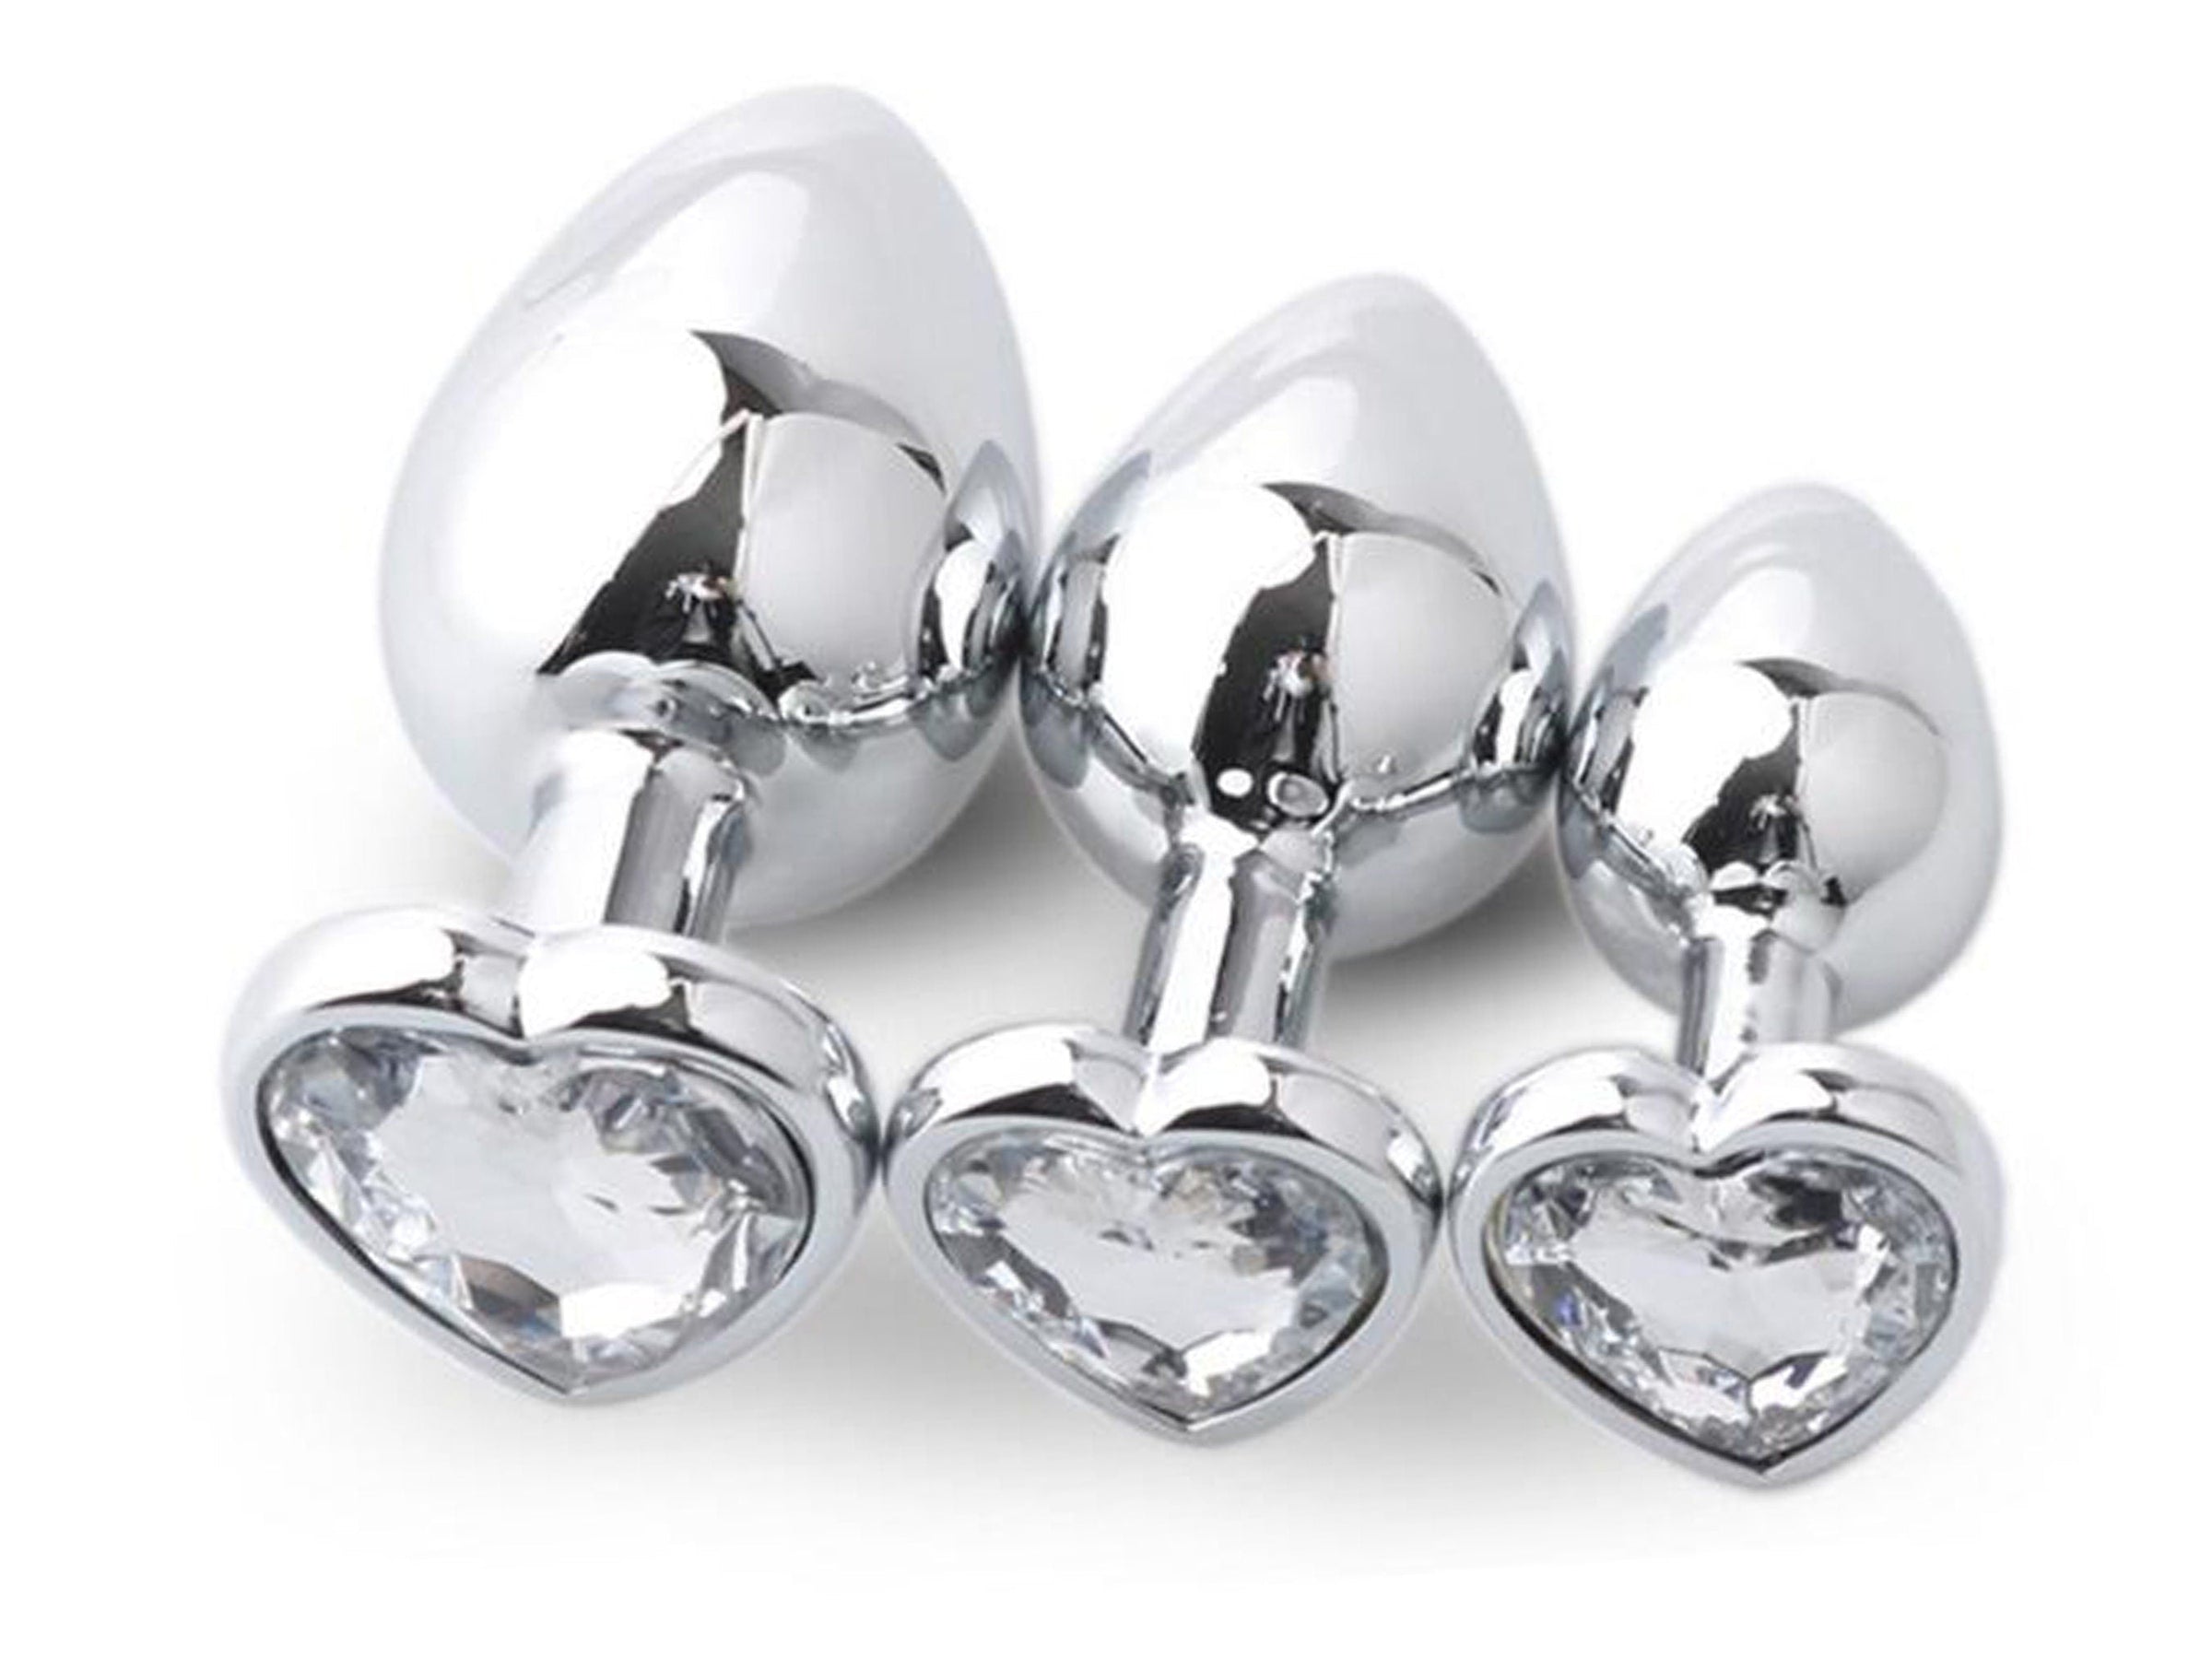 CLEAR White HEART SHAPED Acrylic Crystal Butt plug sizes anal toy